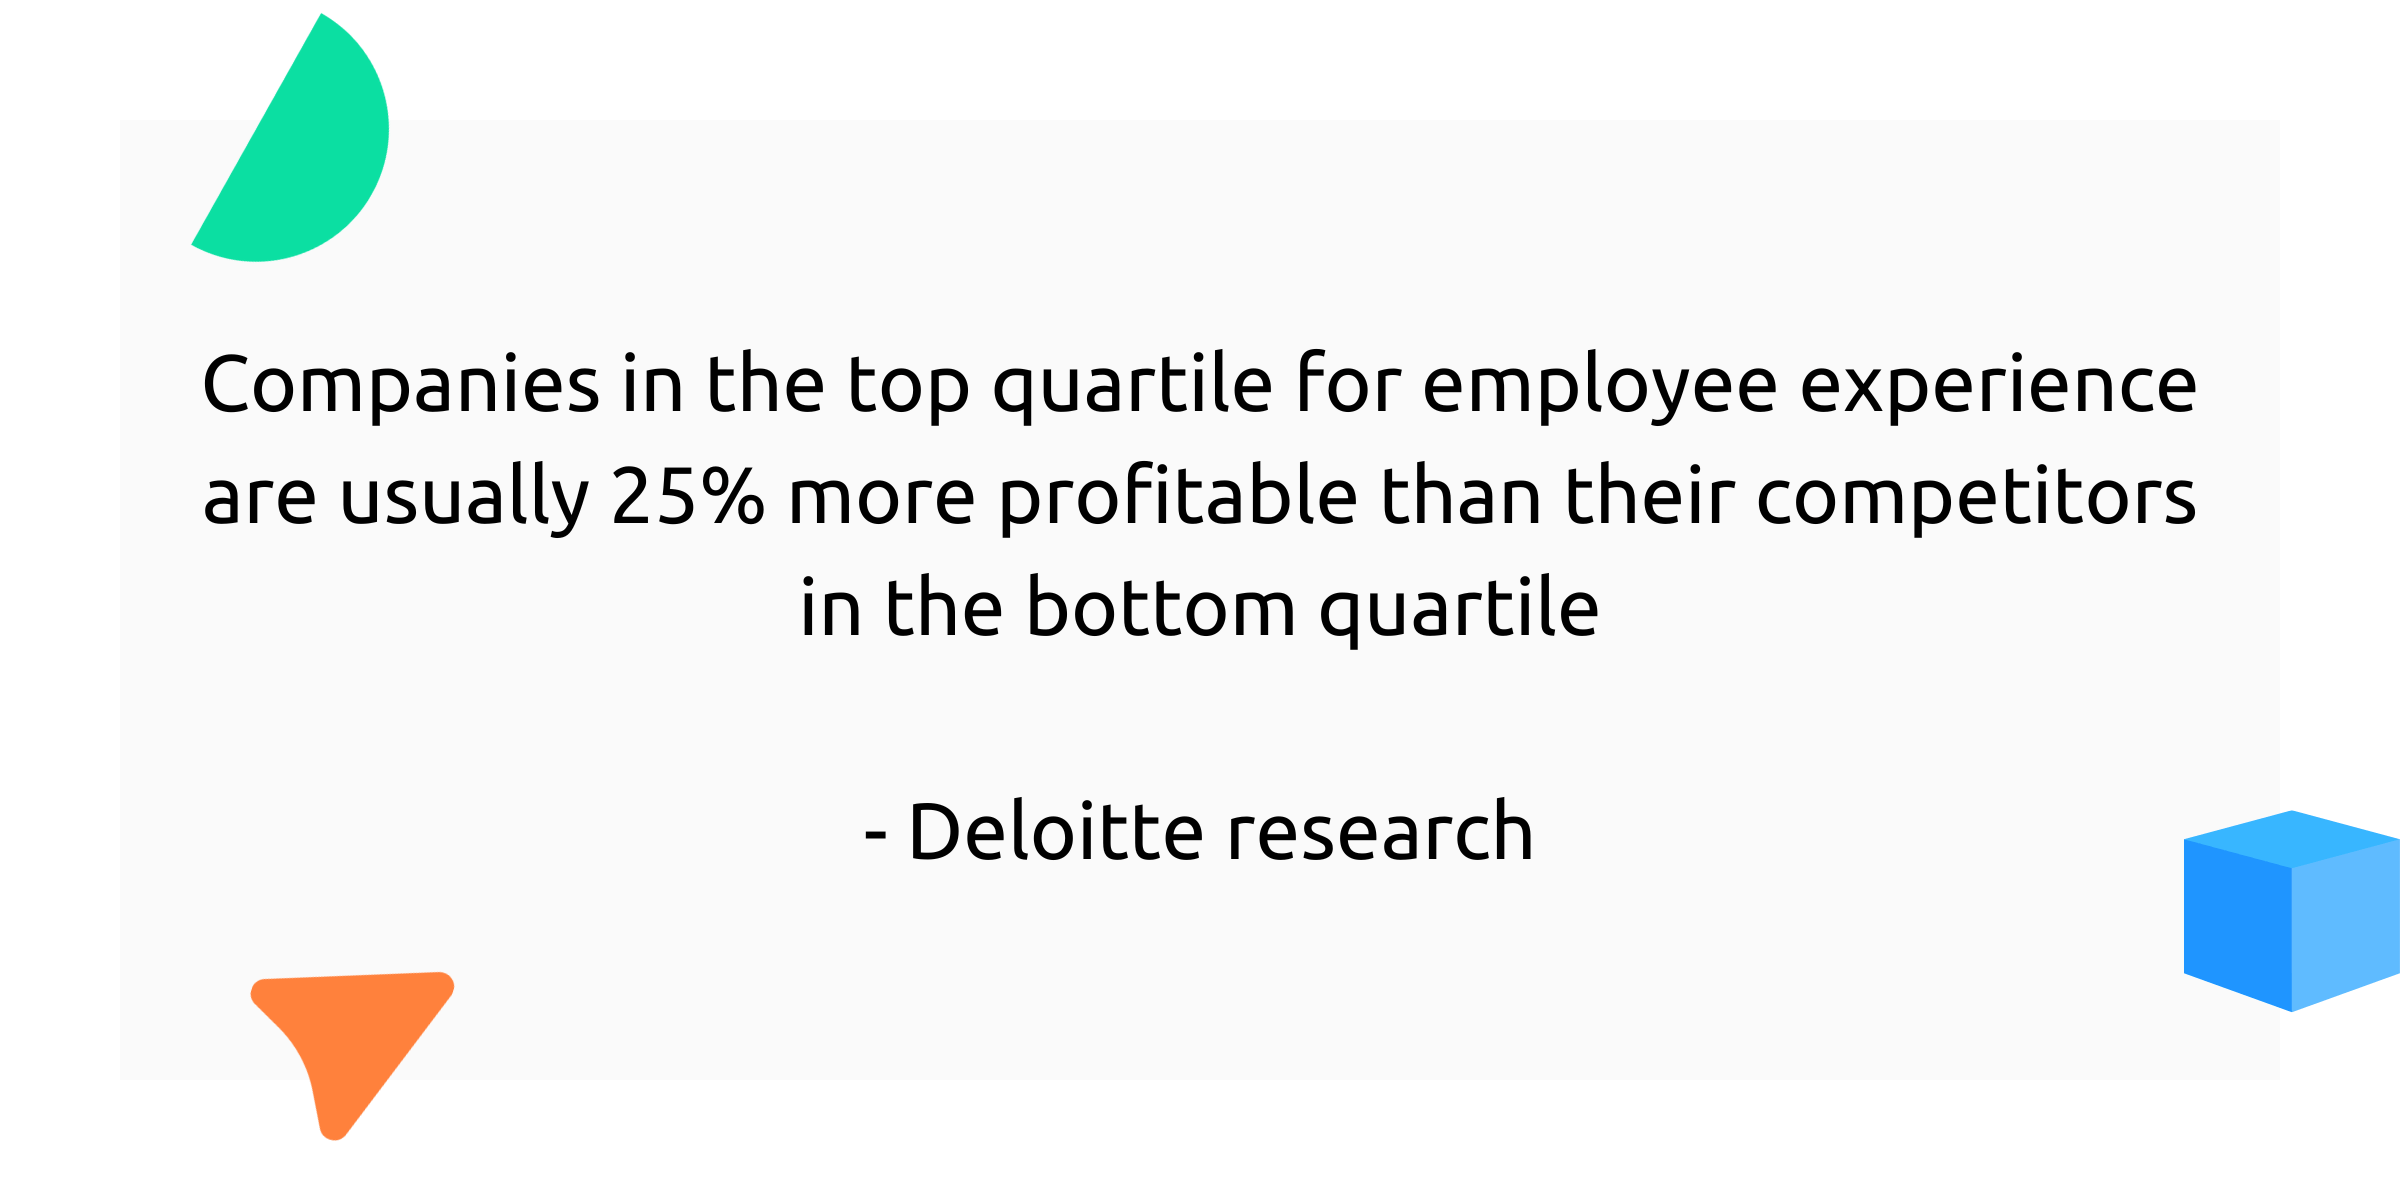 Companies in the top quartile for employee experience are usually 25% more profitable than their competitors in the bottom quartile - Deloitte research